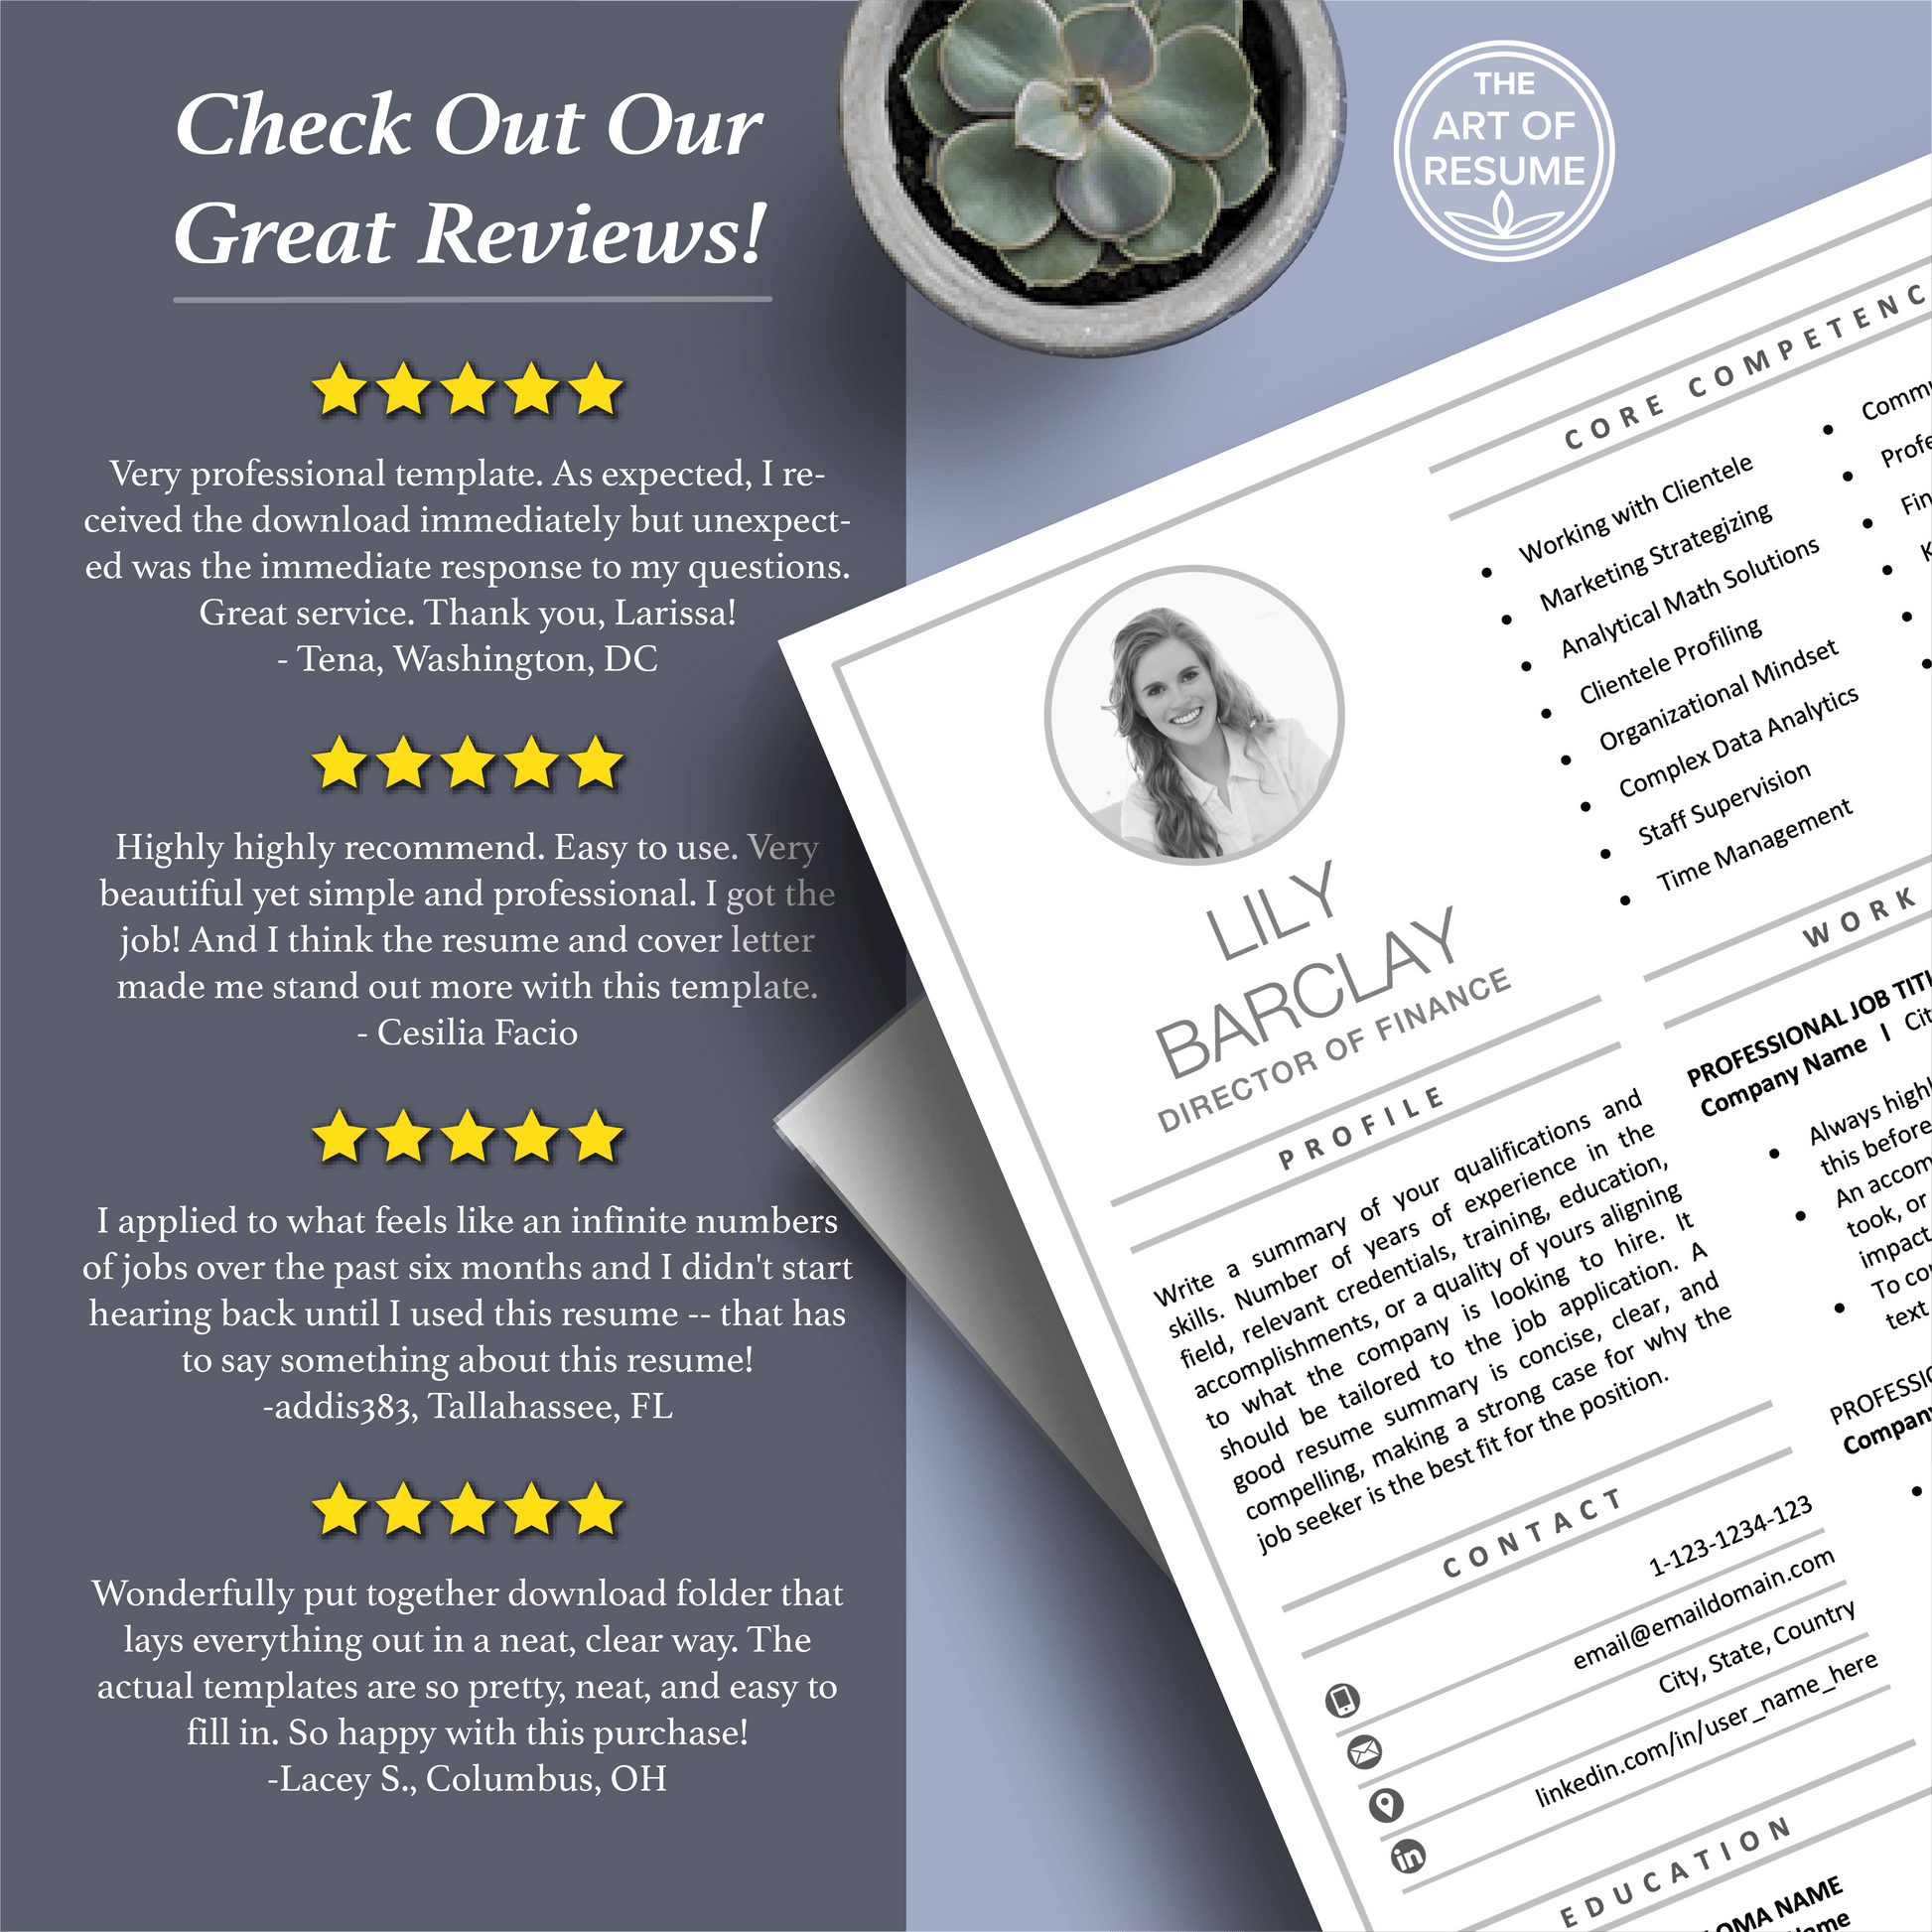 Resume Template Photo | Professional CV Template Download - The Art of Resume